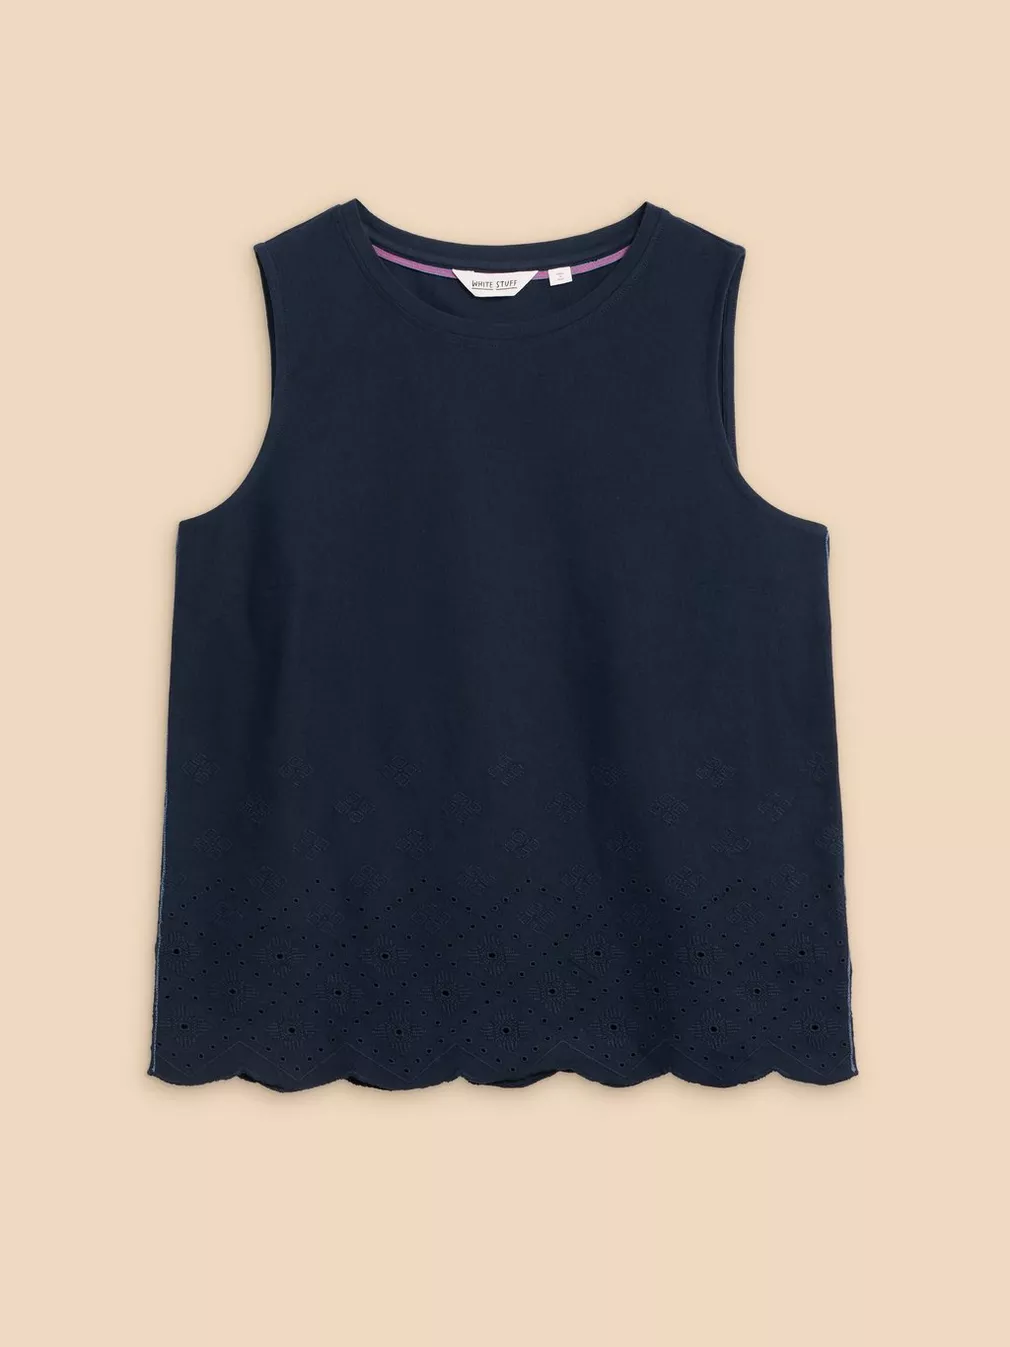 White Stuff Silvia Cut-Out Tank - French Navy Clothing - Tops - Shirts - Sleeveless Knits by White Stuff | Grace the Boutique